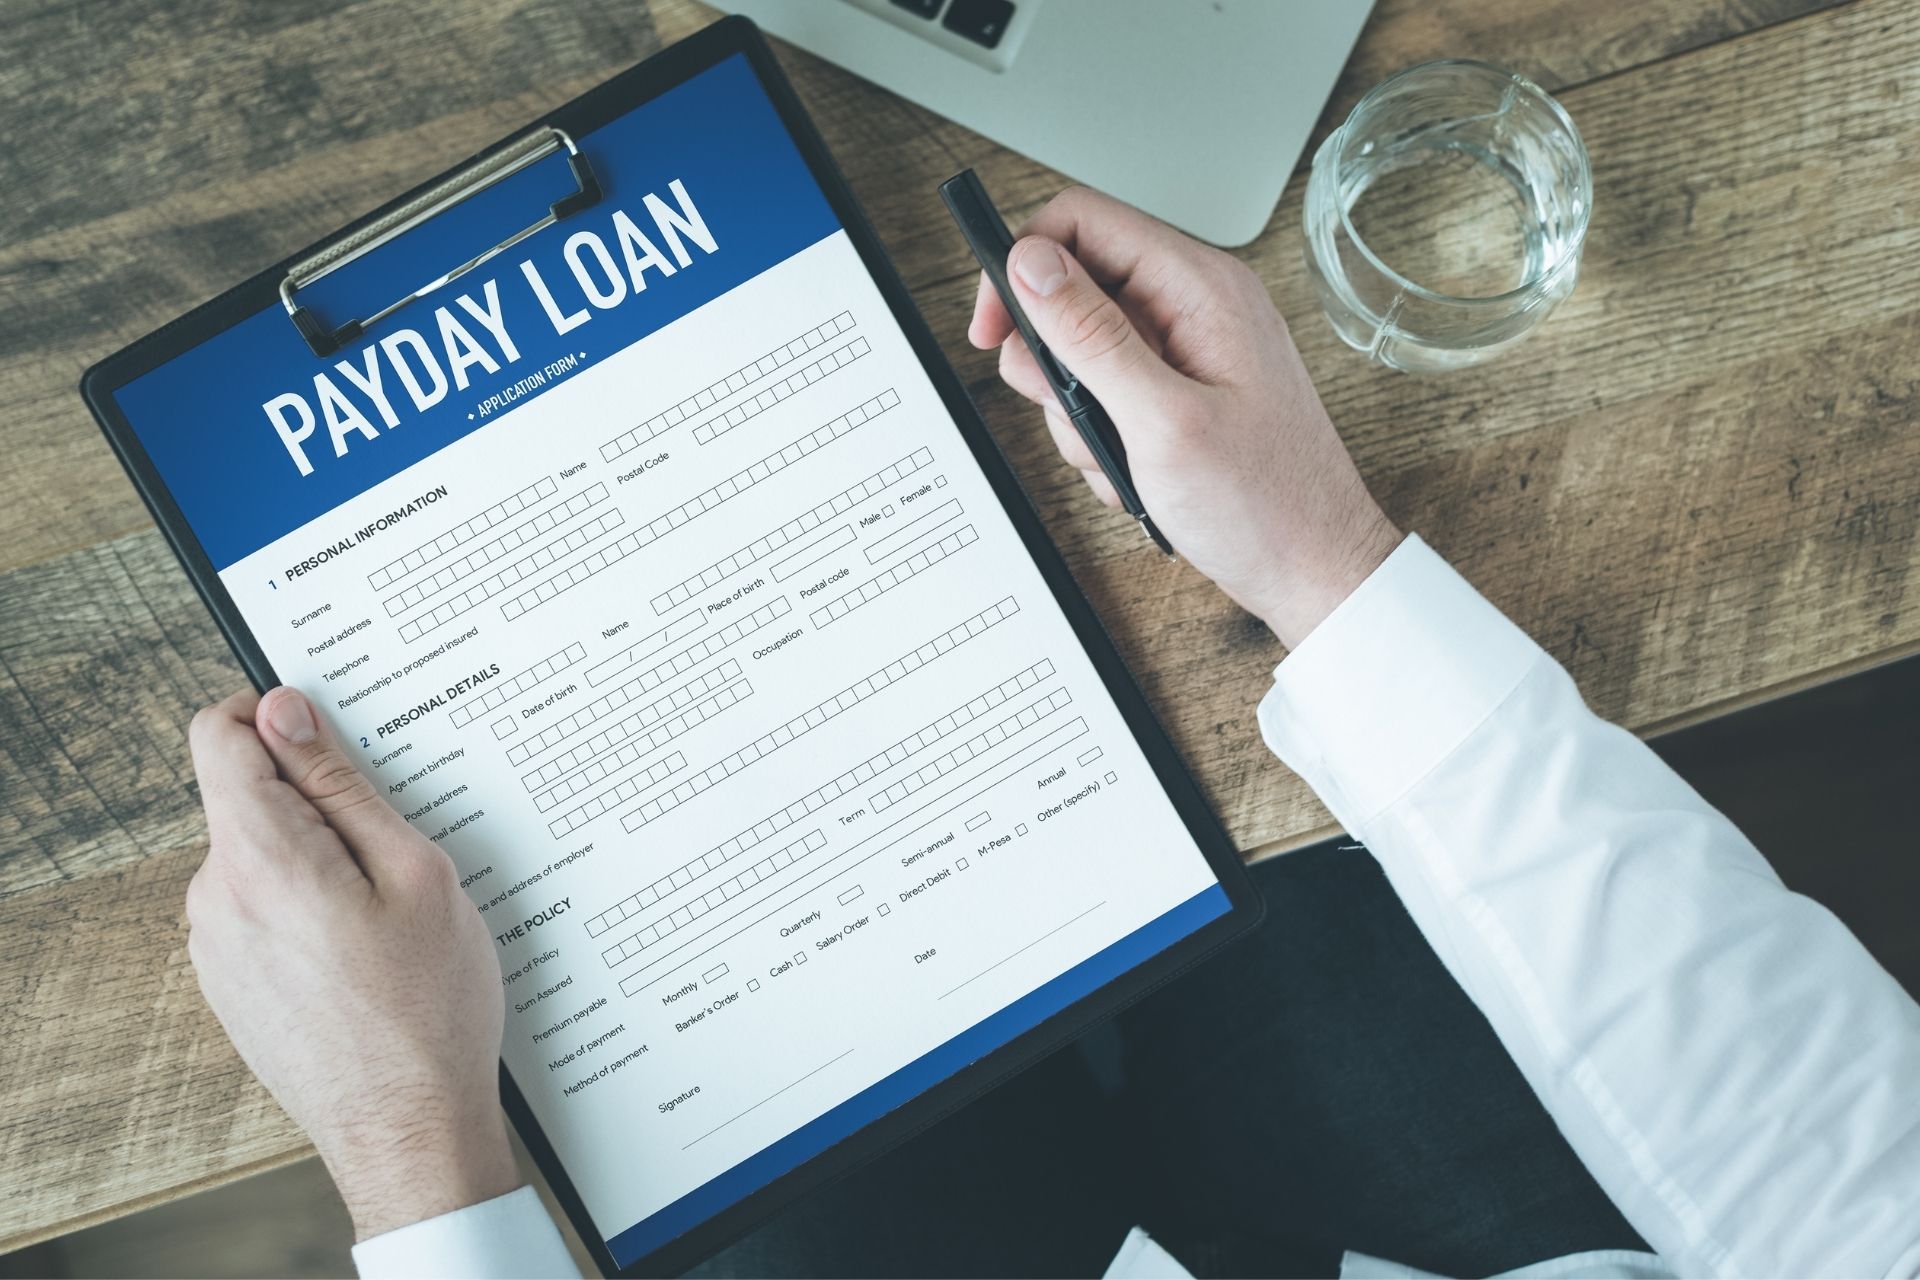 What are payday loans and how do I apply for them?